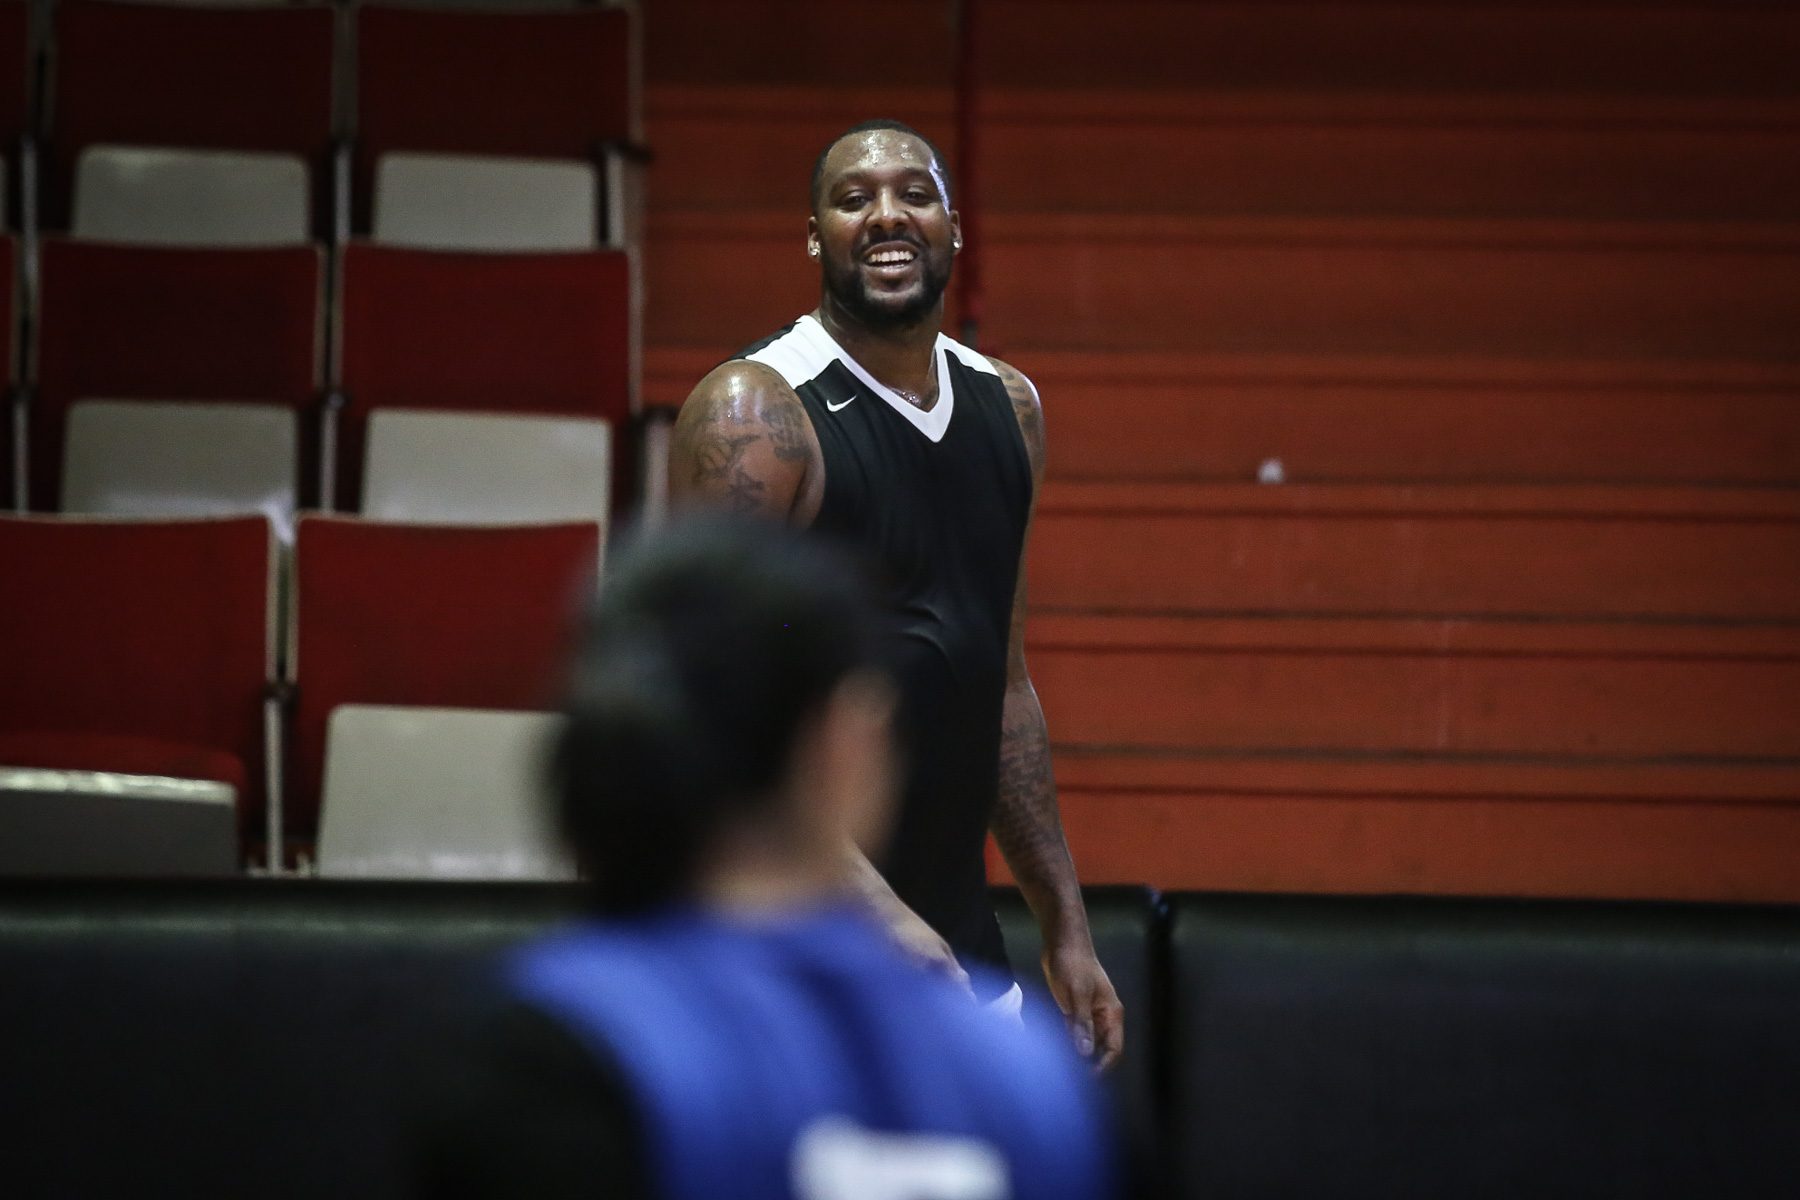 IN PHOTOS: Blatche all smiles as he settles in with Gilas ahead of SEABA tilt